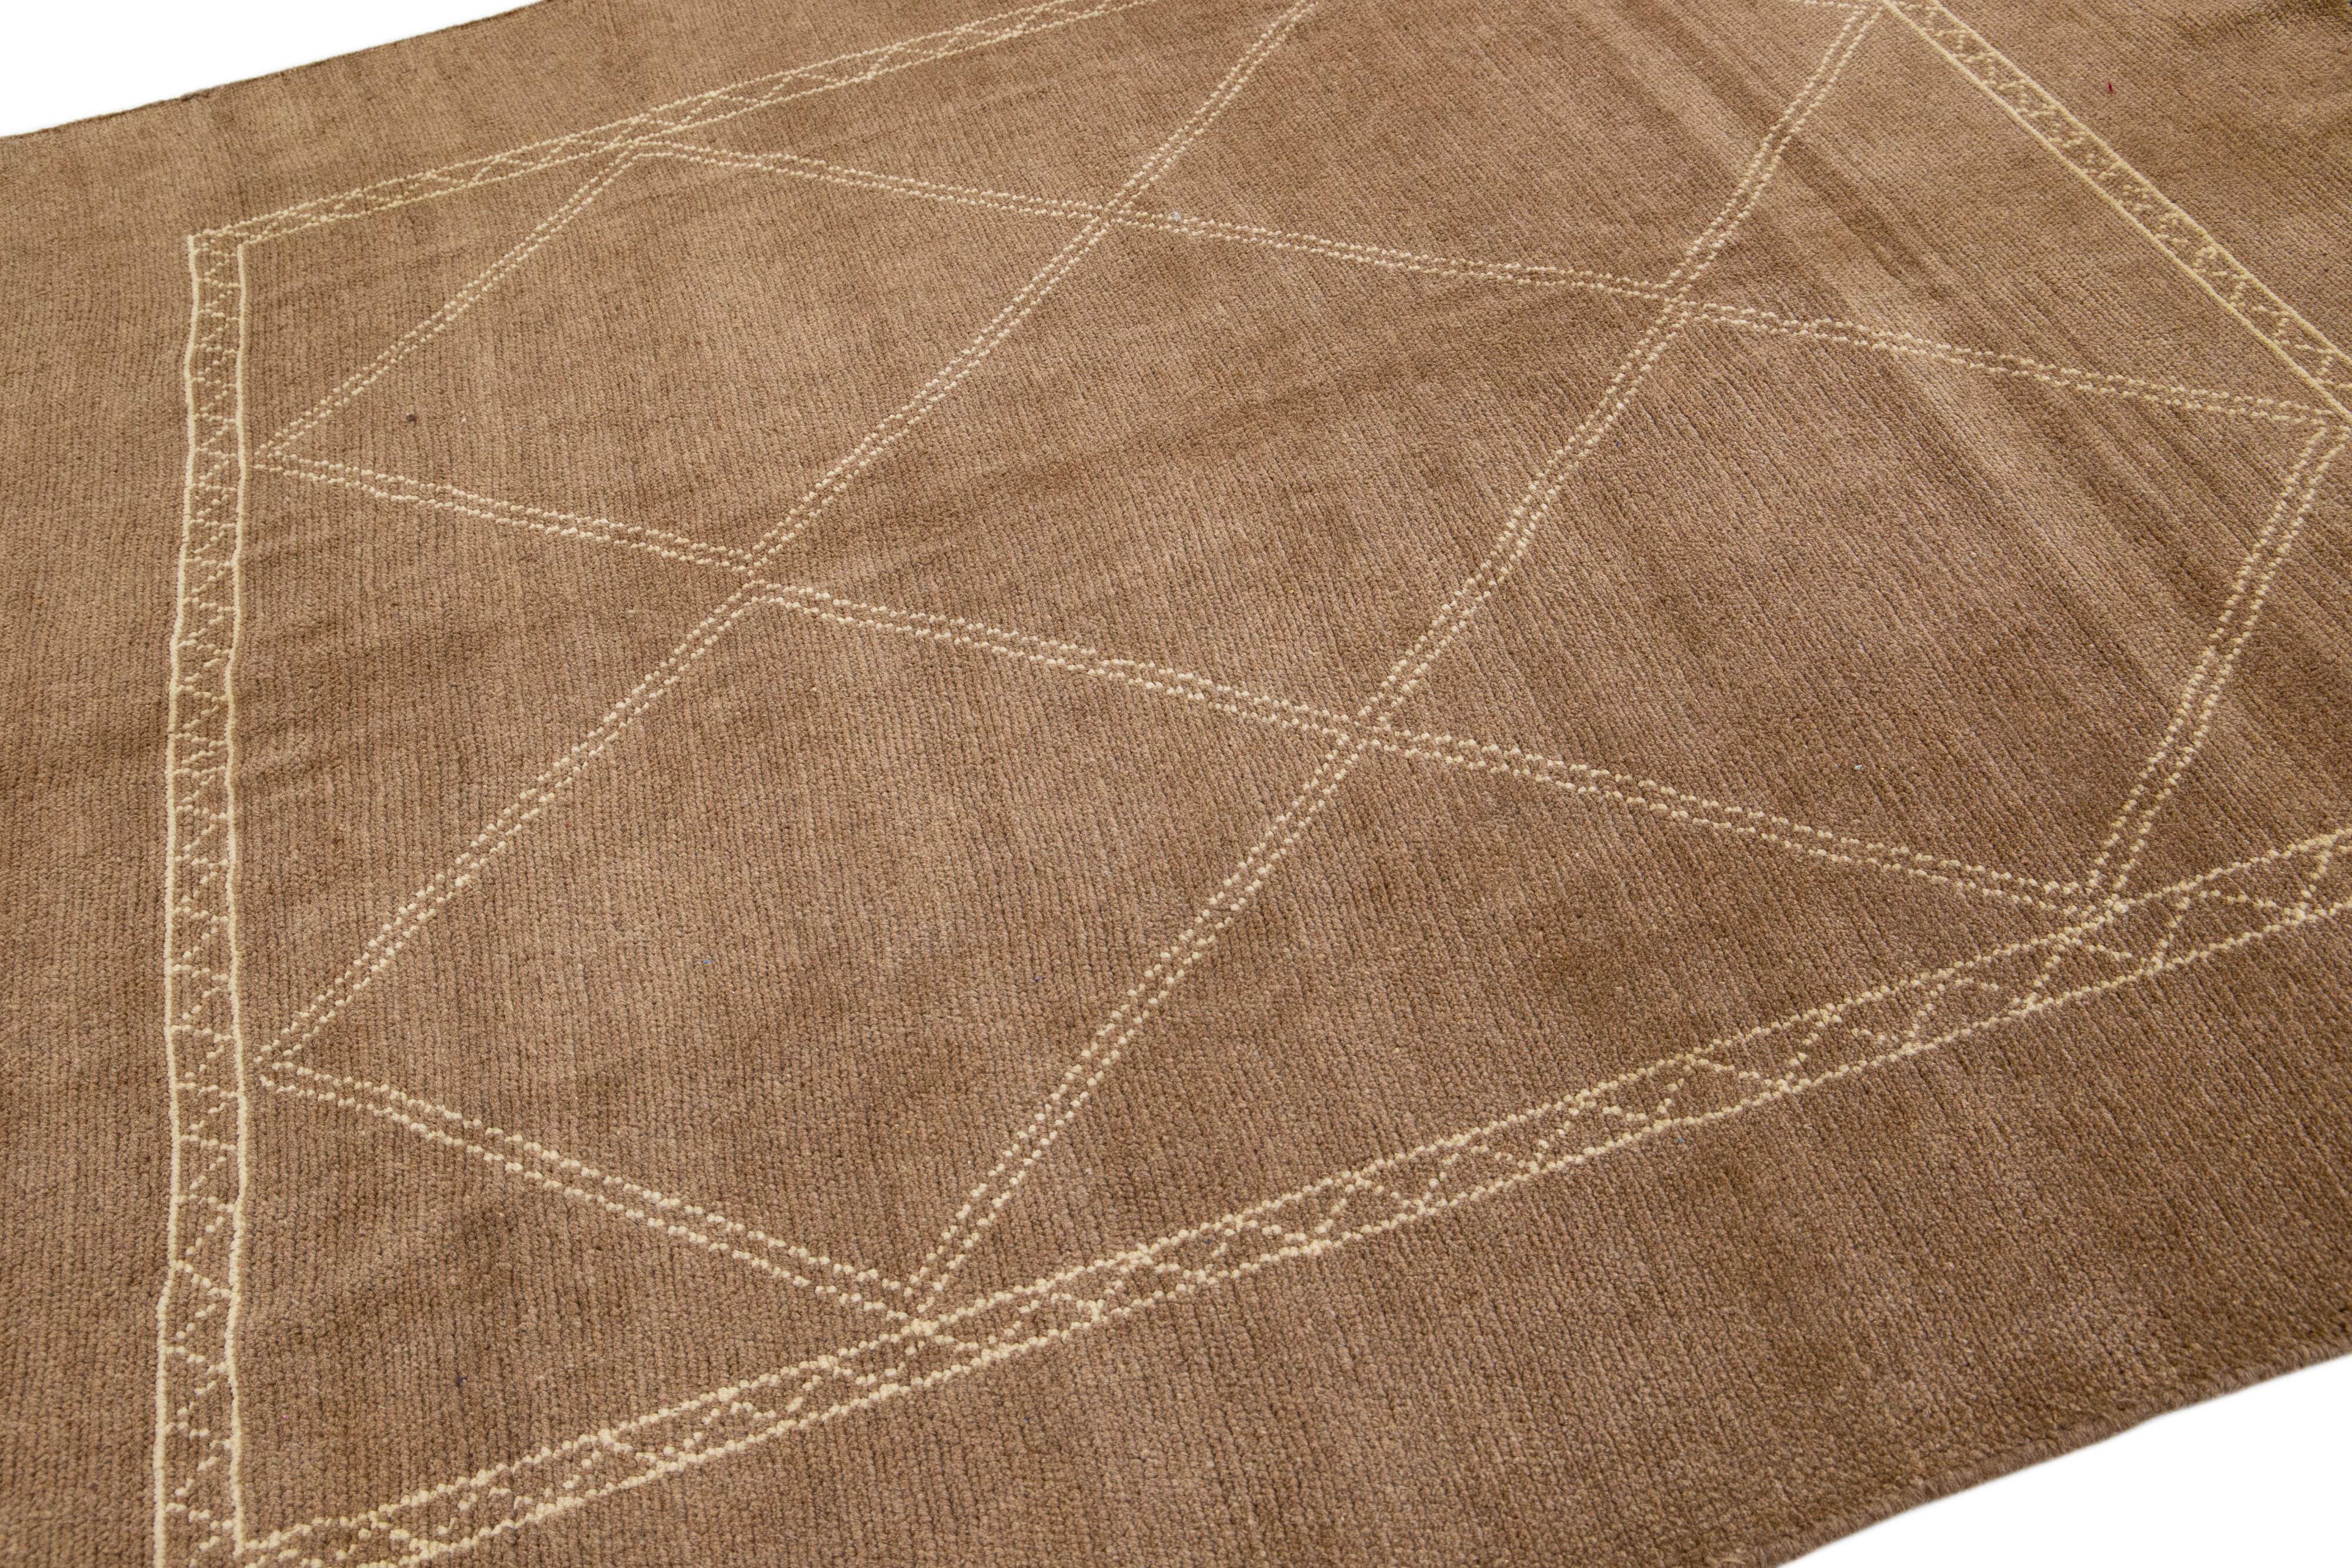 Modern Moroccan Style Light Brown Handmade Geometric Square Wool Rug by Apadana In New Condition For Sale In Norwalk, CT